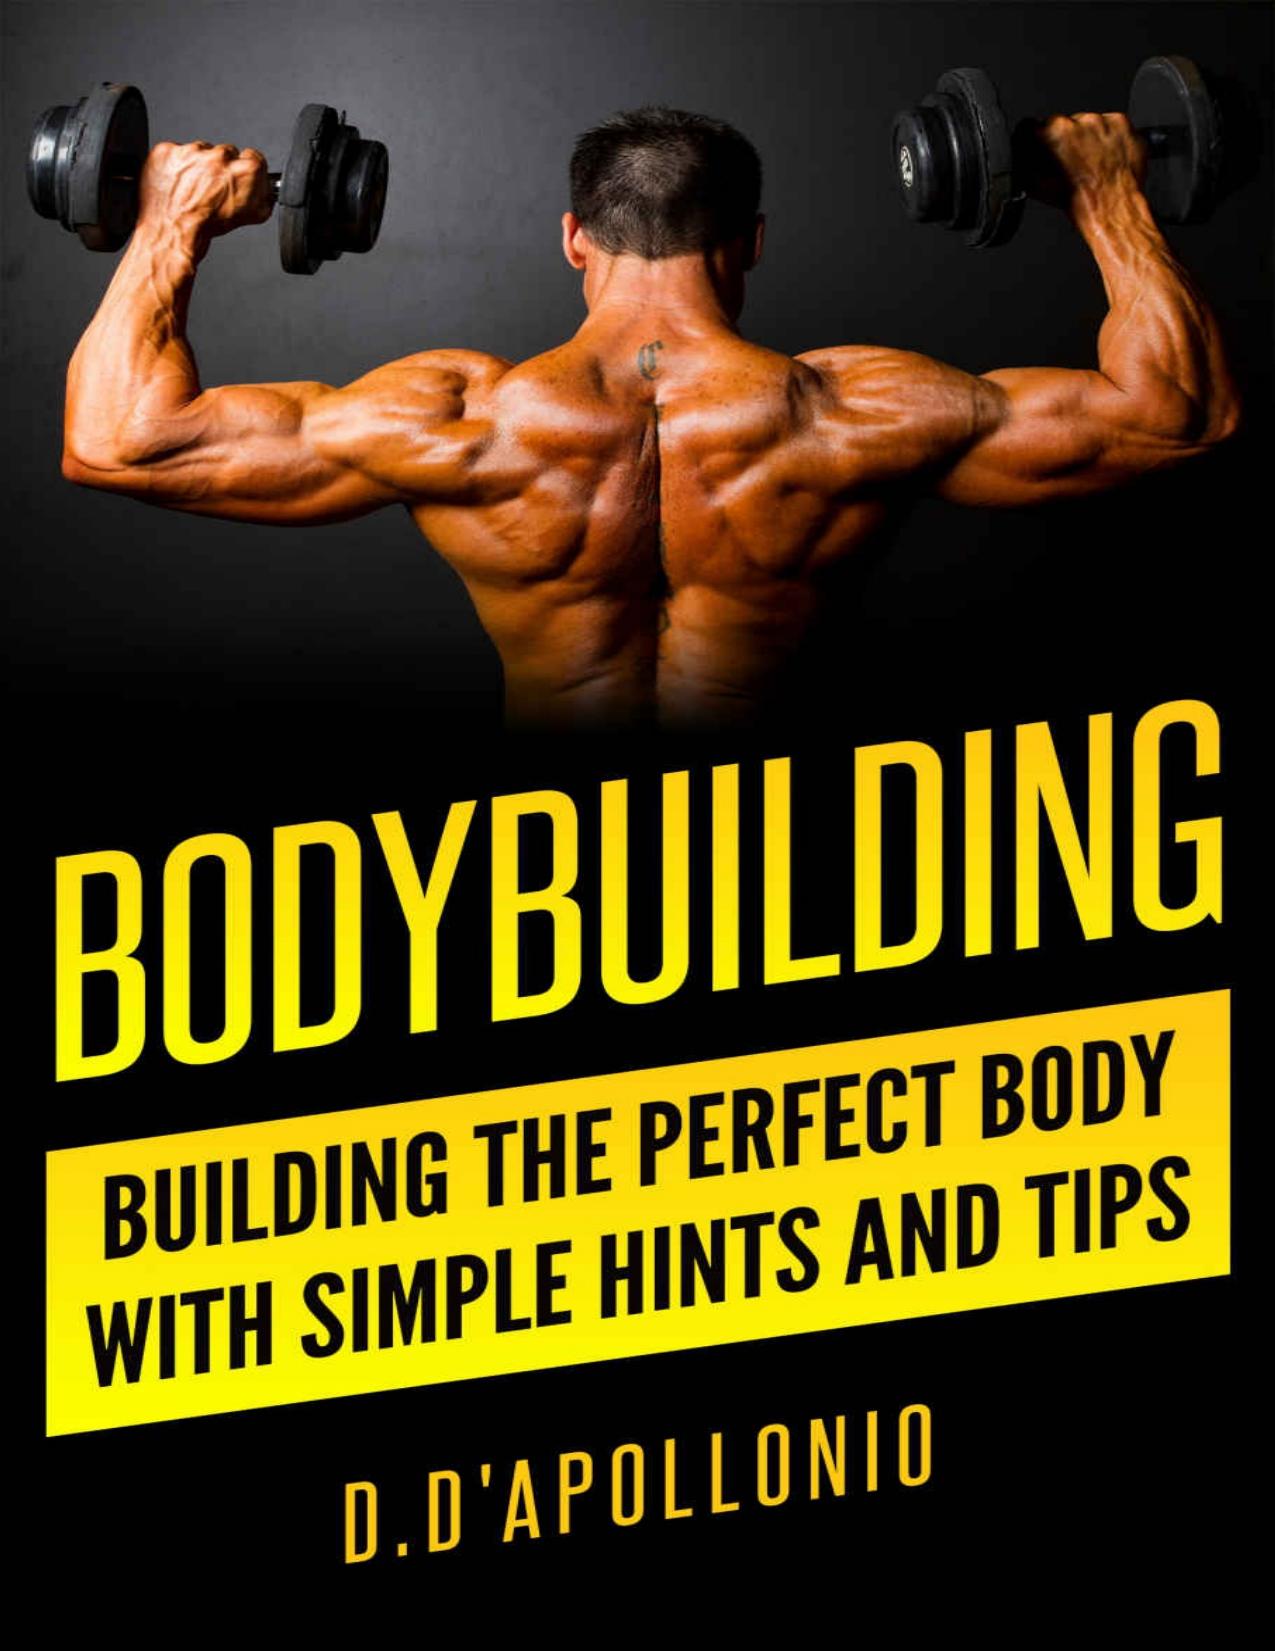 Bodybuilding: Building the perfect Body With Simple Hints and Tips (muscle, fitness, mass gain, lose weight, body building for beginners, lose fat book, fitness training Book 1) by Daniel D'apollonio